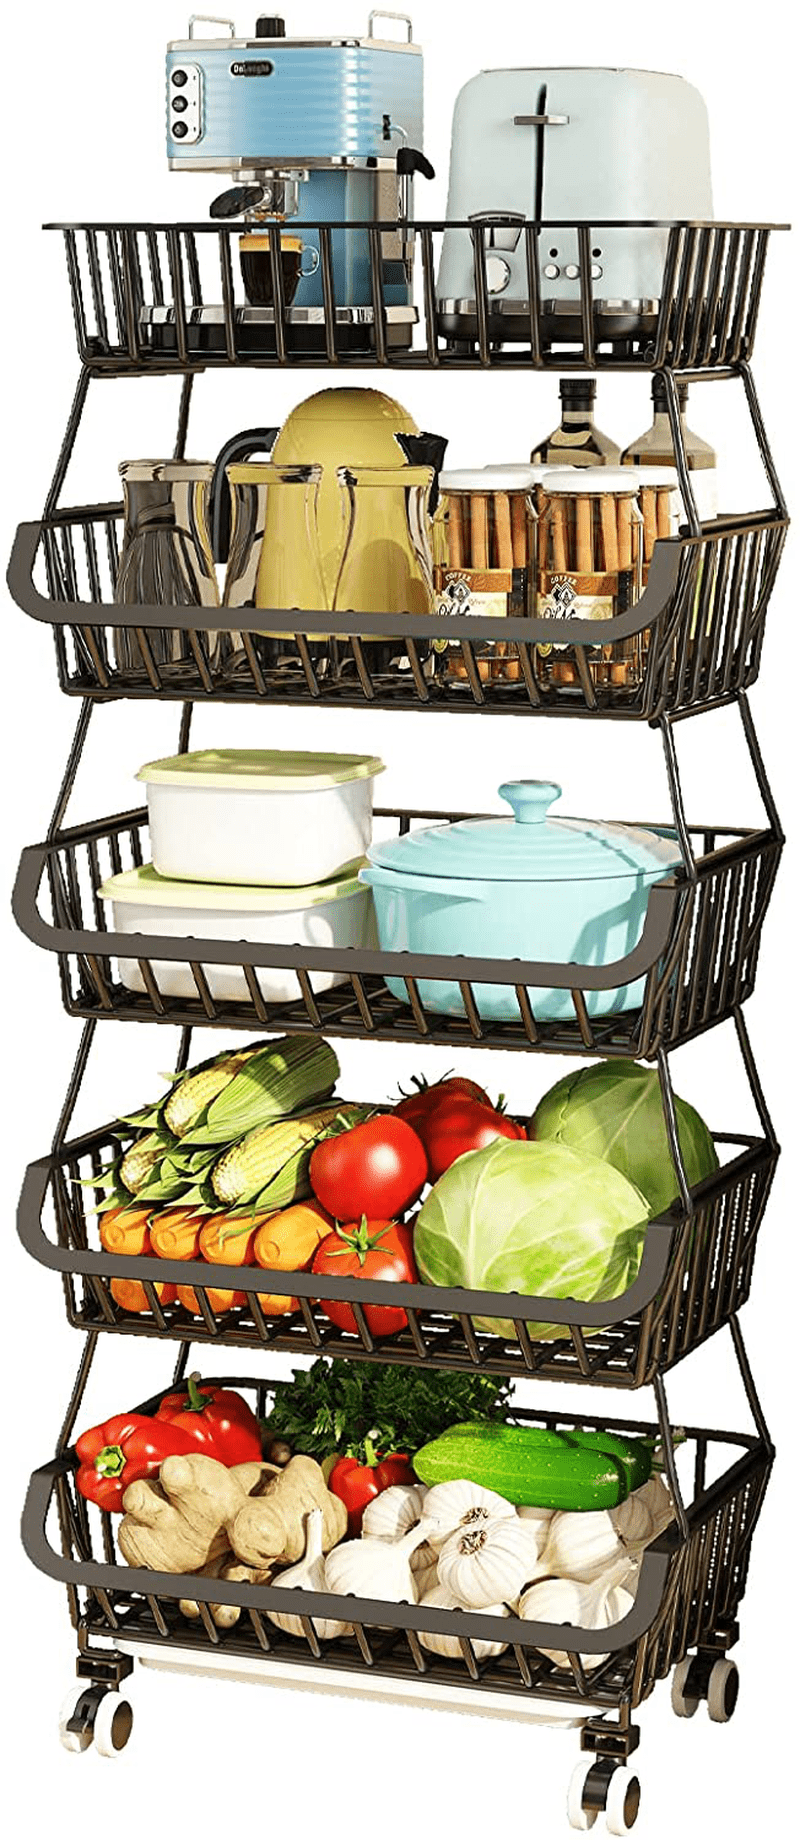 Wisdom Star 6 Tier Fruit Vegetable Basket for Kitchen, Fruit Vegetable Storage Cart, Vegetable Basket Bins for Onions and Potatoes, Wire Storage Basket Organizer Utility Cart with Wheels, Black Home & Garden > Kitchen & Dining > Food Storage Wisdom Star 5 TIER  